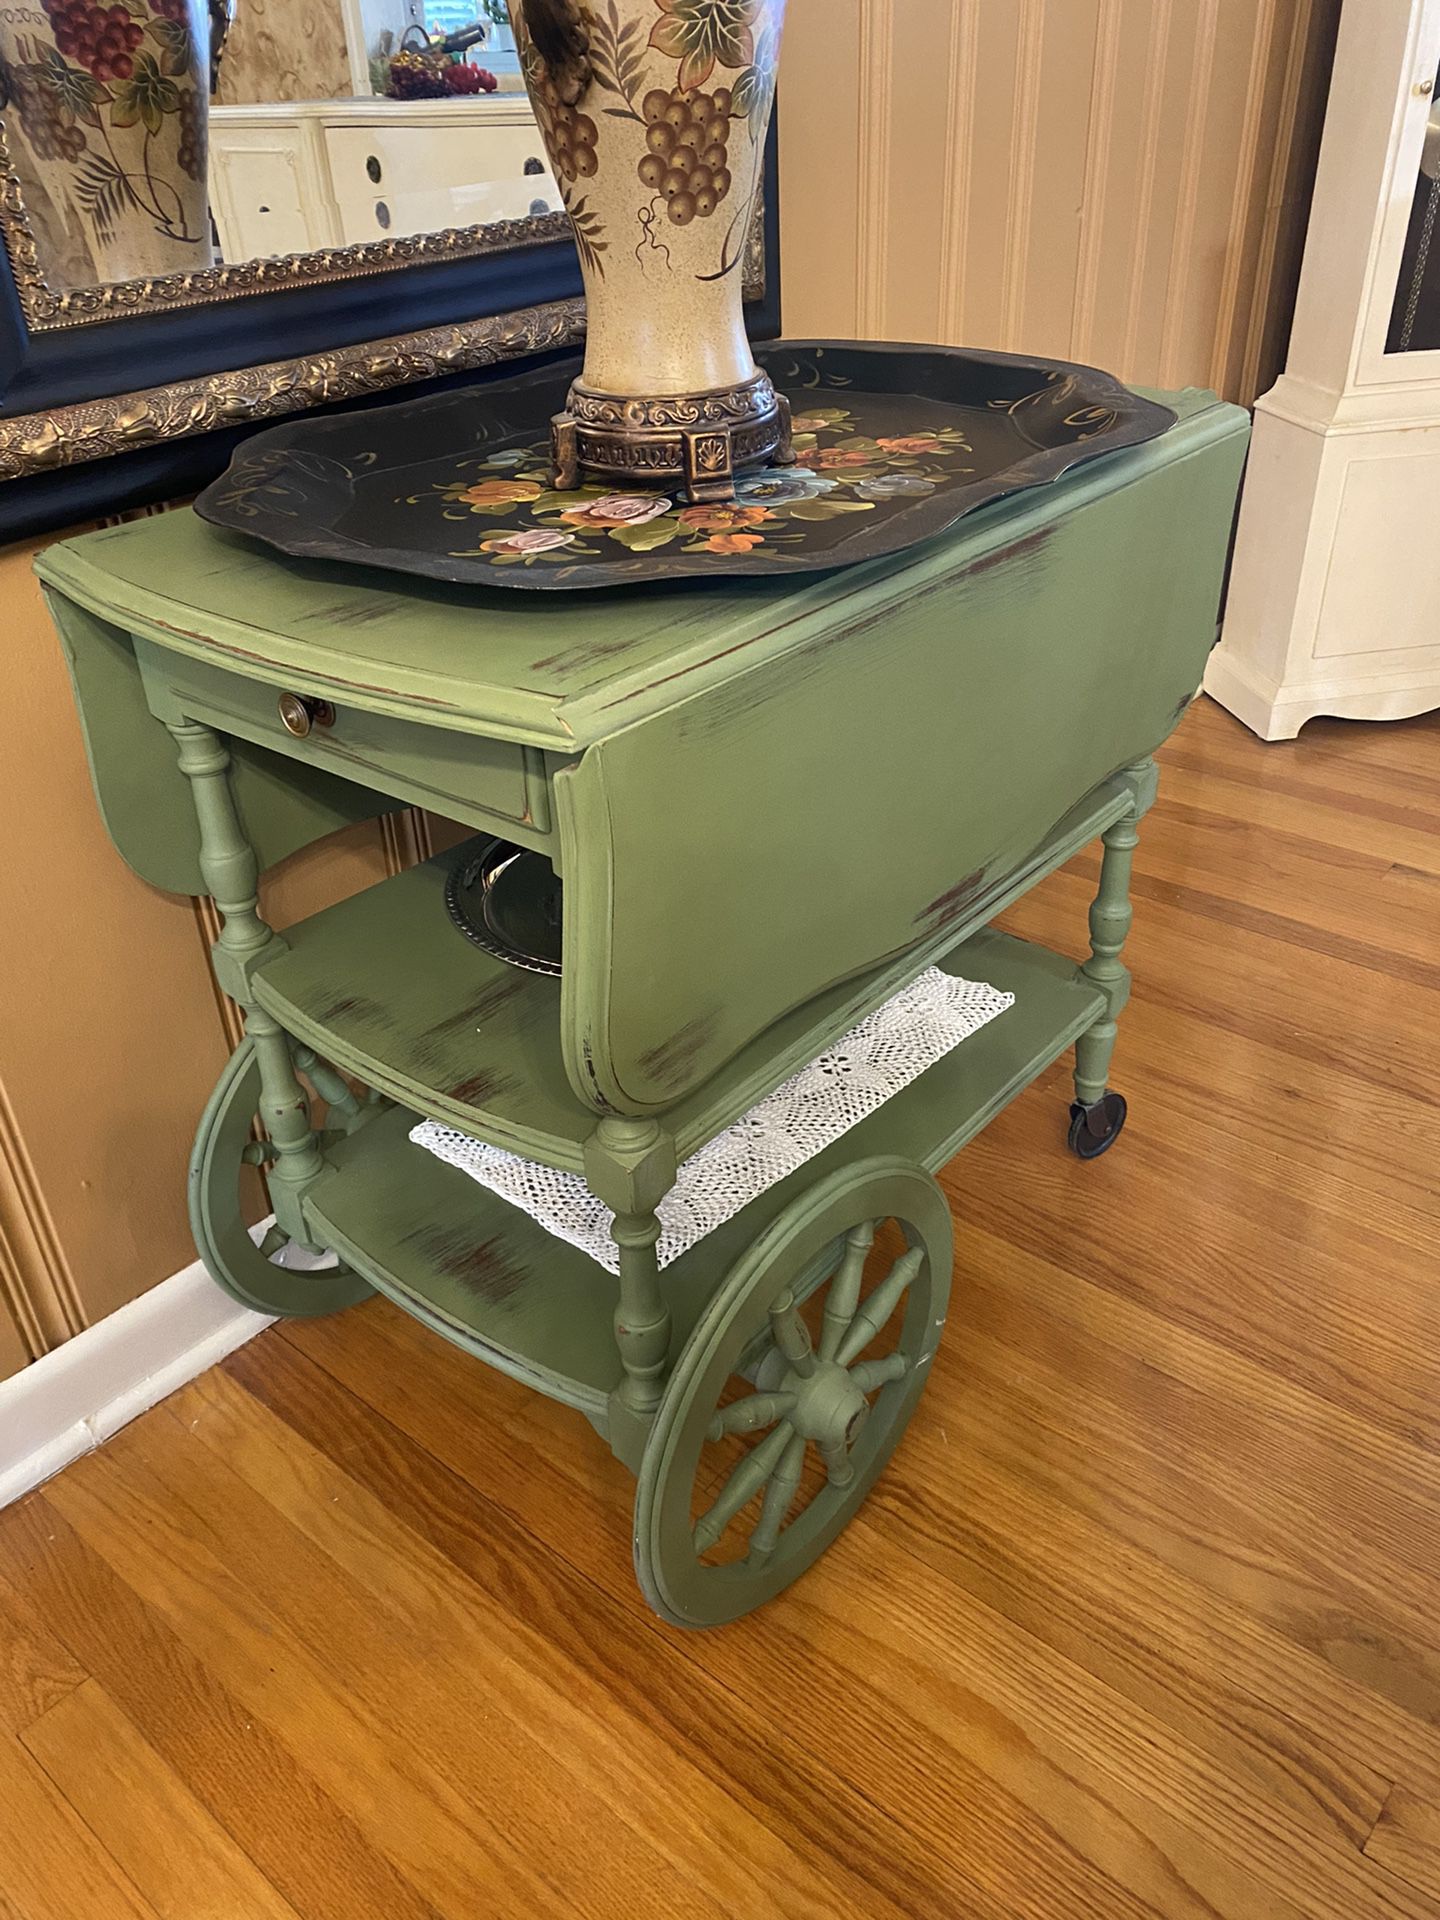 Serving cart great for coffee or goodies